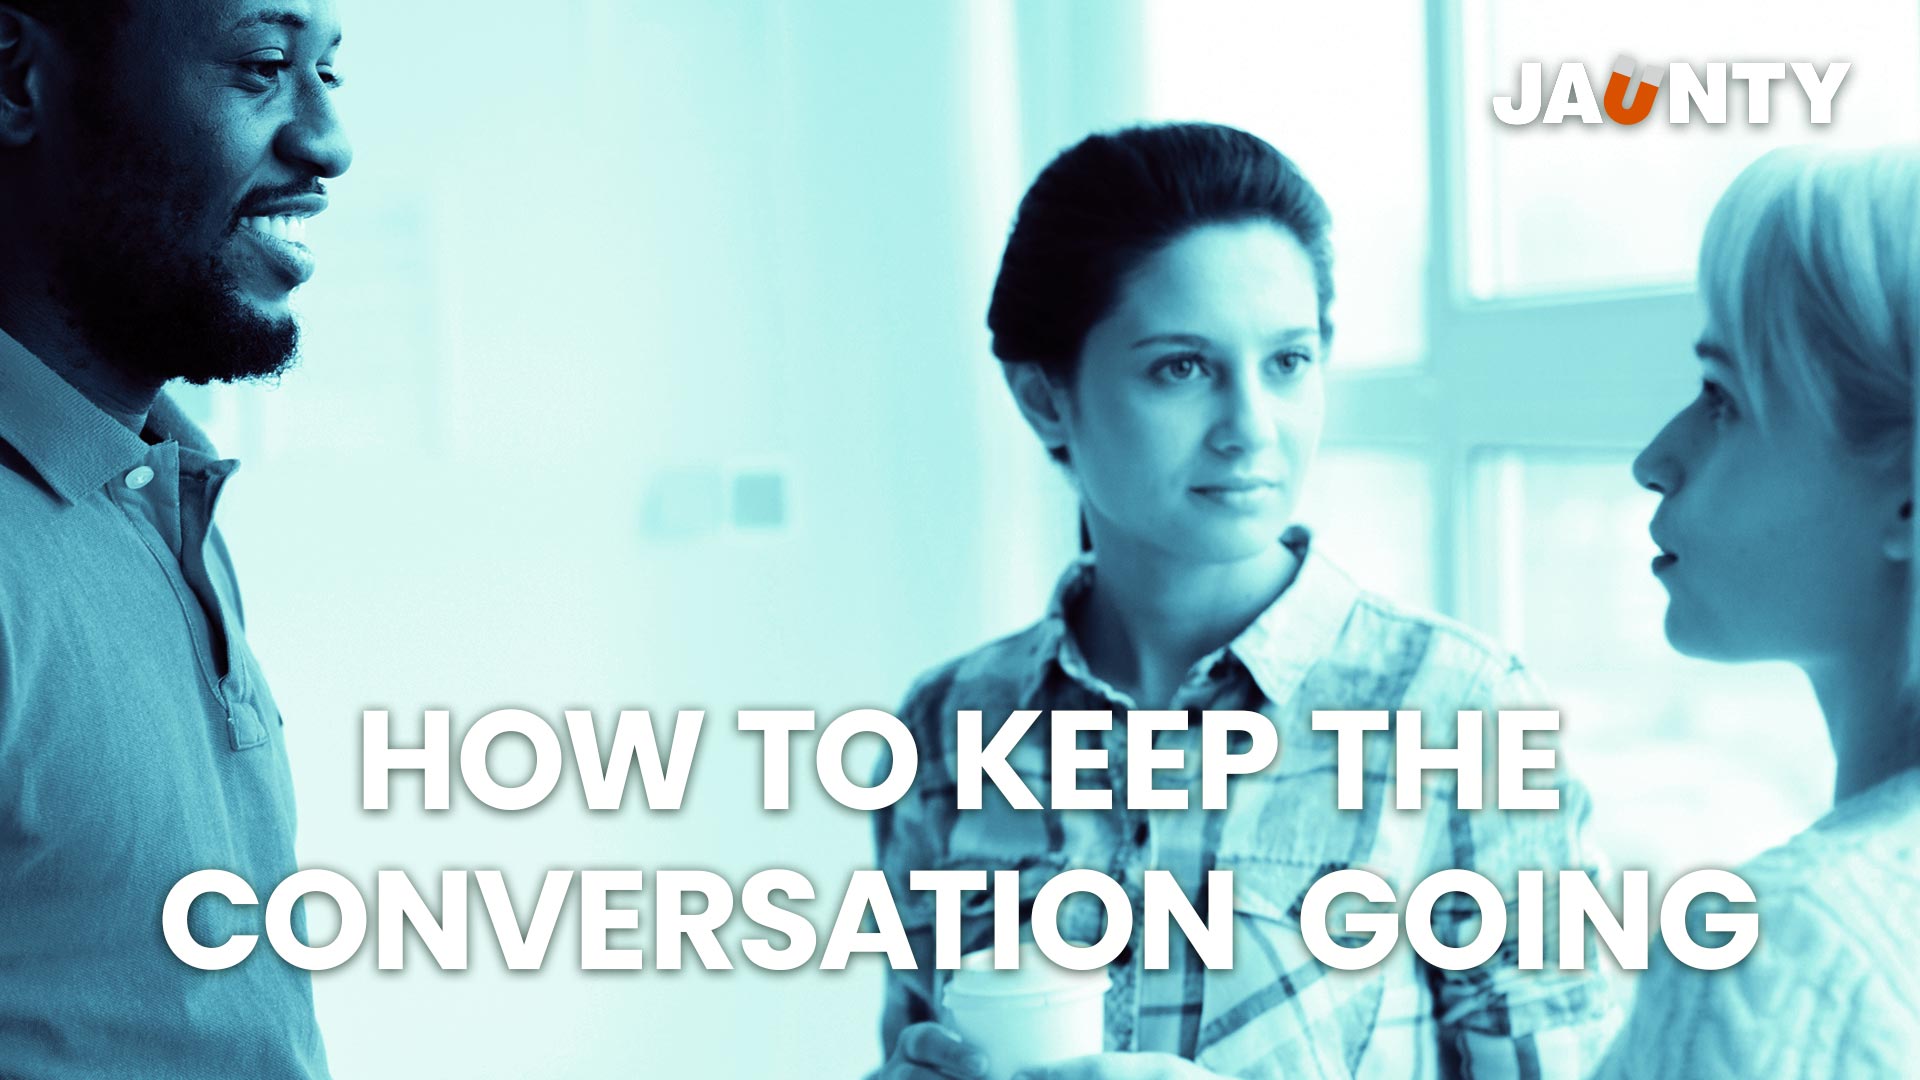 How to keep the conversation going